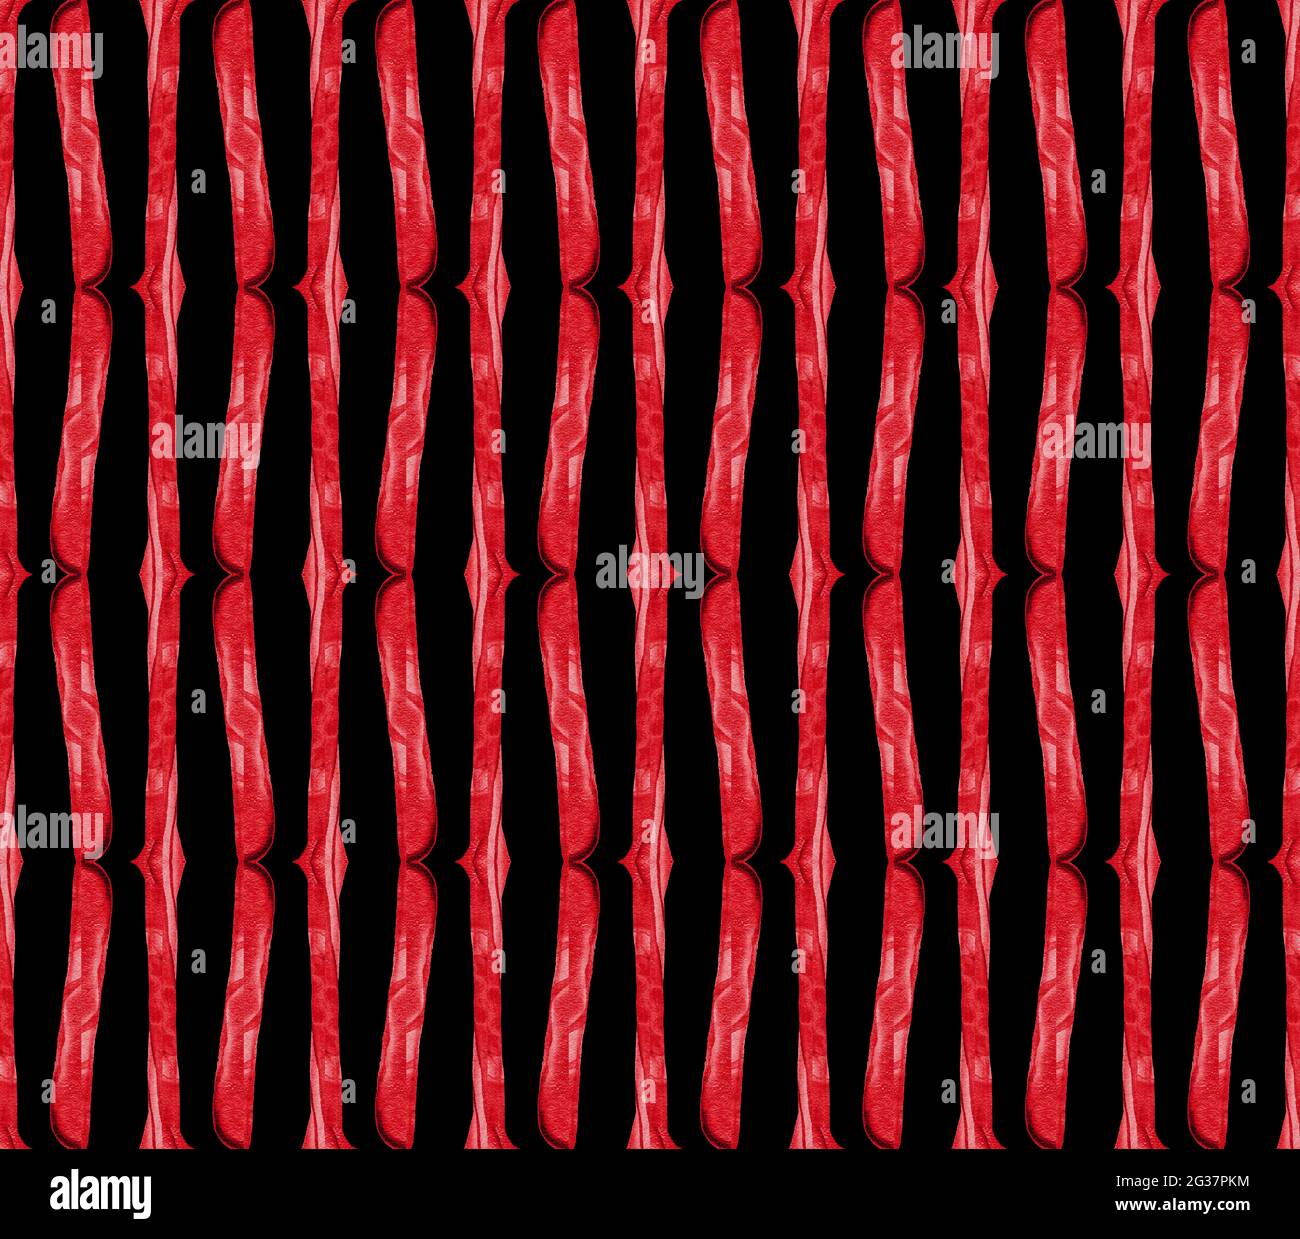 Seamless pattern with Organic Stripes in Red tones and Black Stock Photo